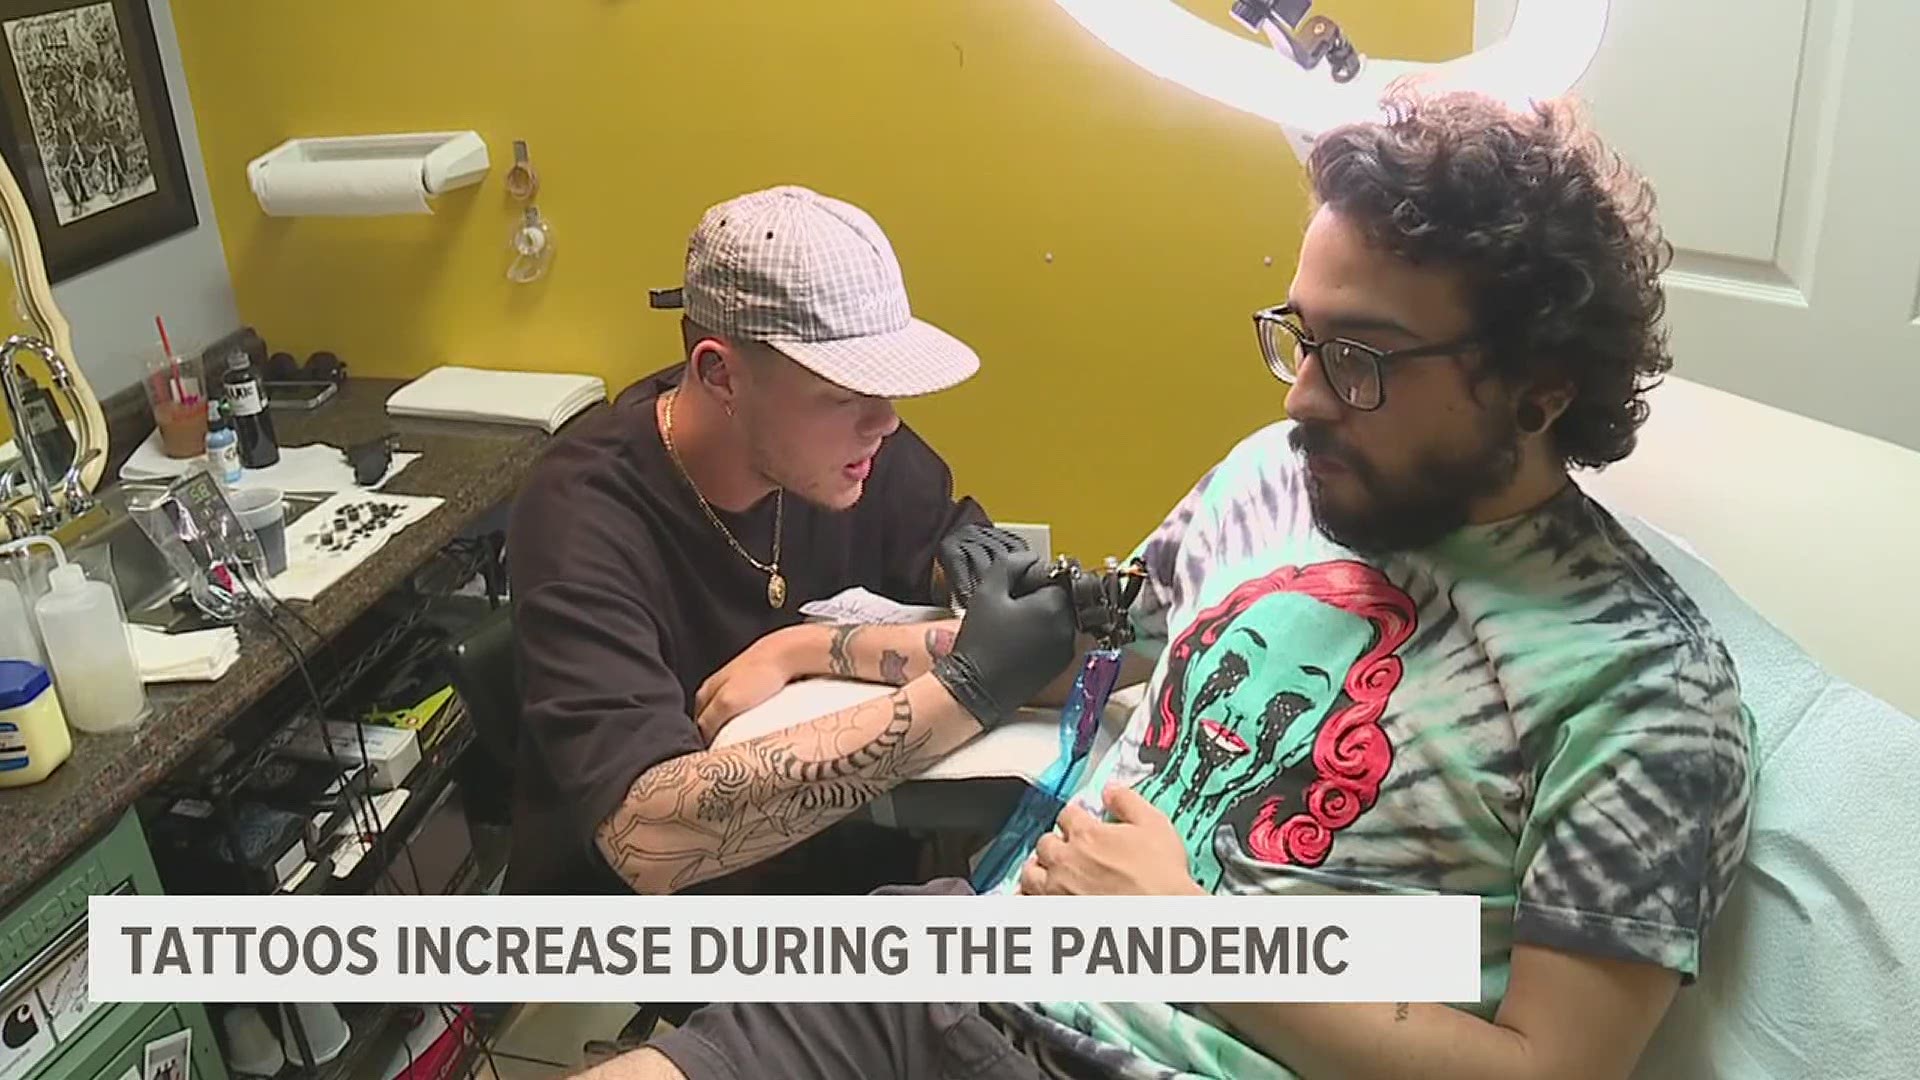 The tattoo industry continues to boom and is expected to increase by 6.6% this year.